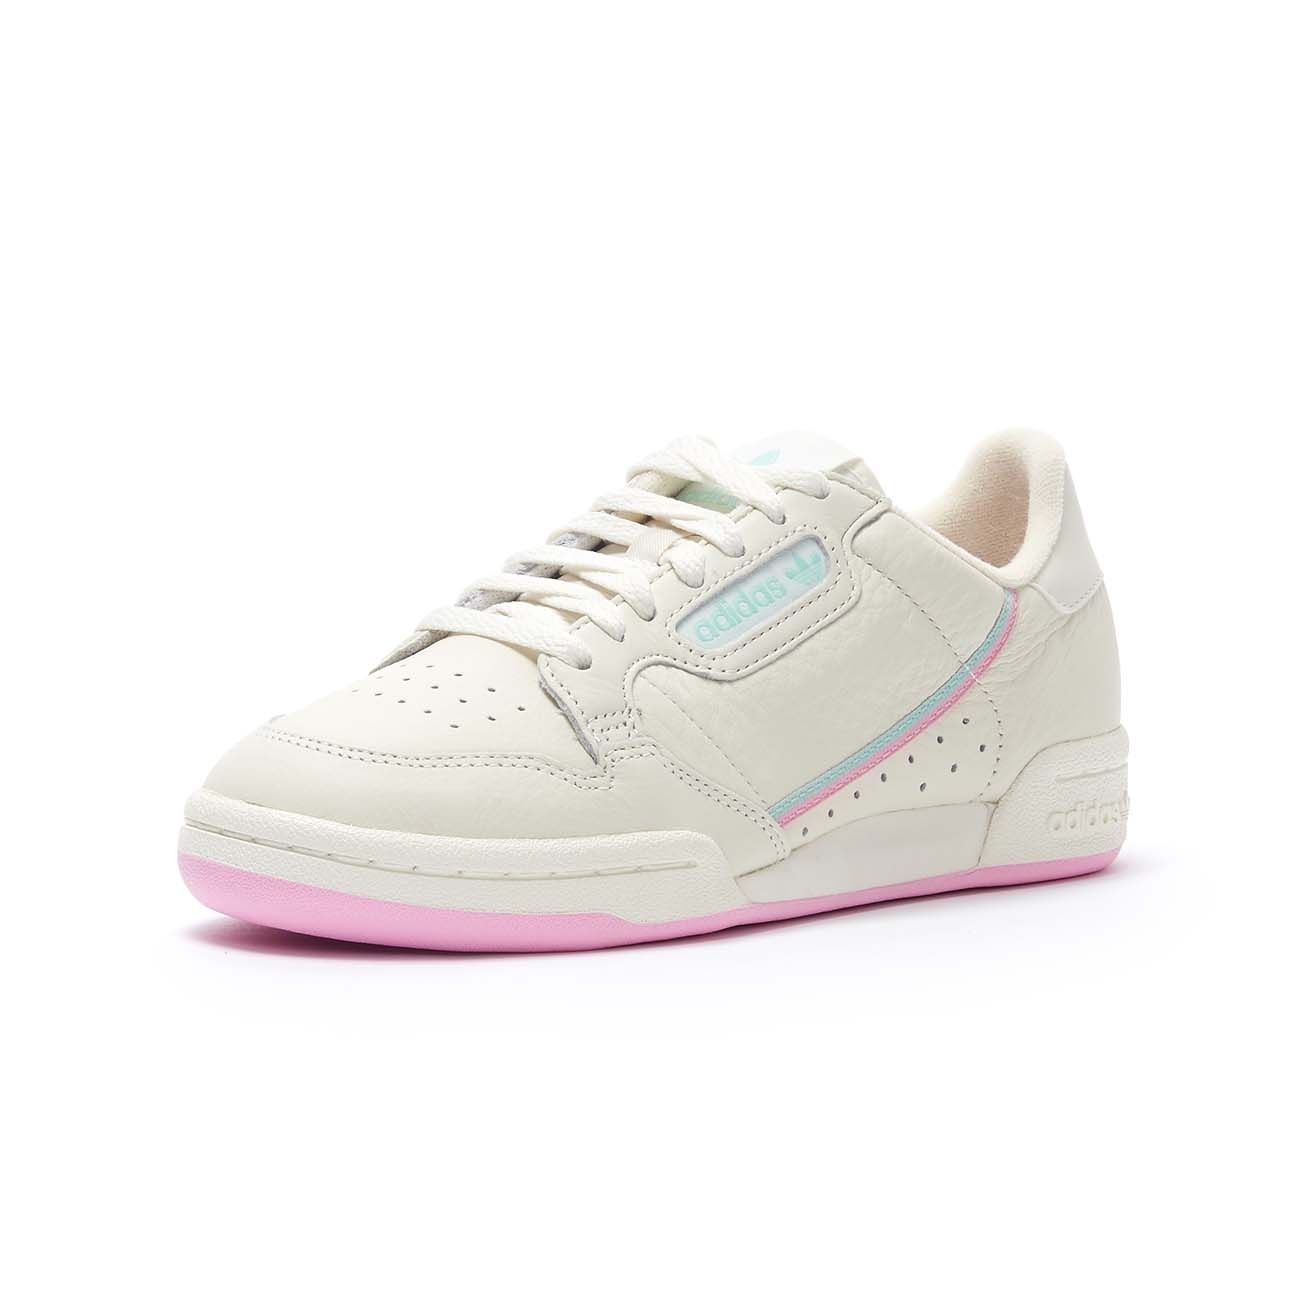 CONTINENTAL SNEAKERS Woman Off white pink | Sportswear